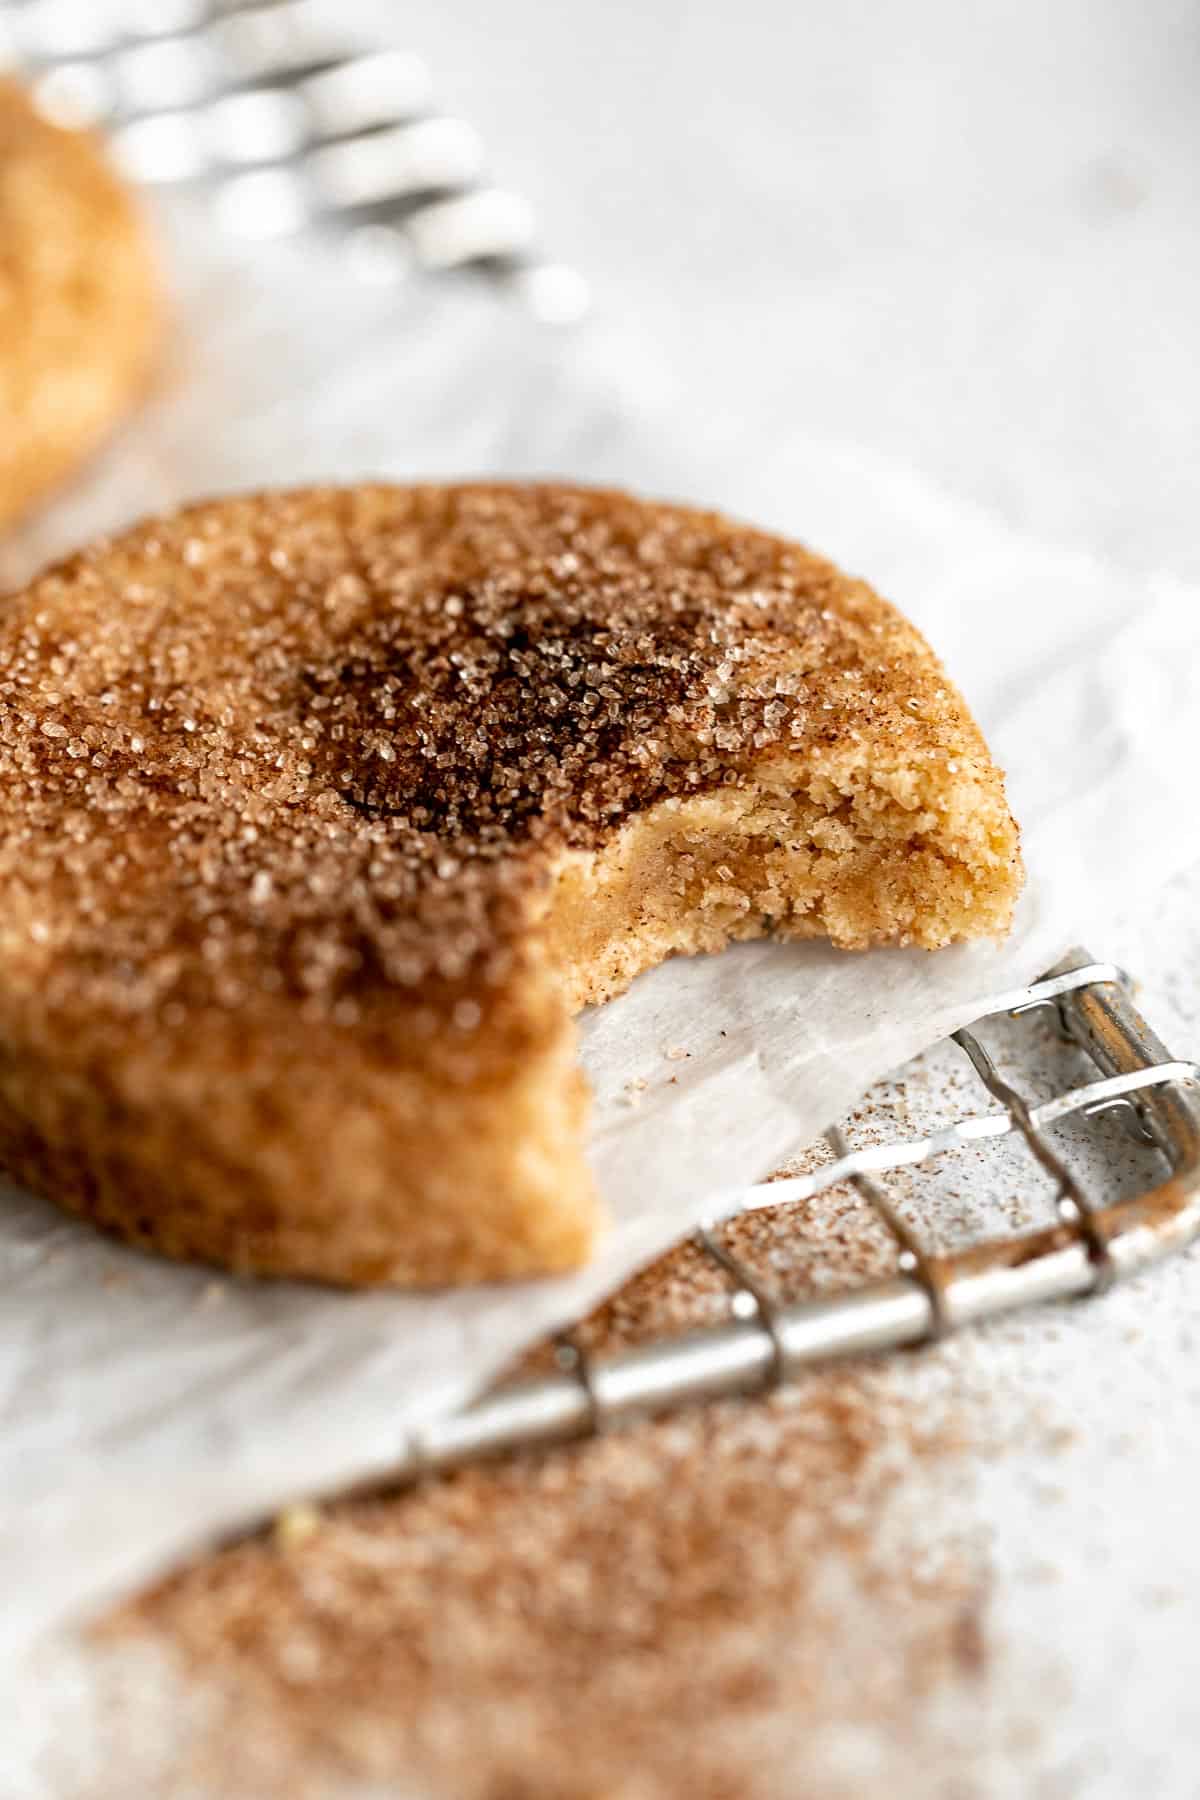 one bite taken out of the gluten free snickerdoodle to show the chewy texture